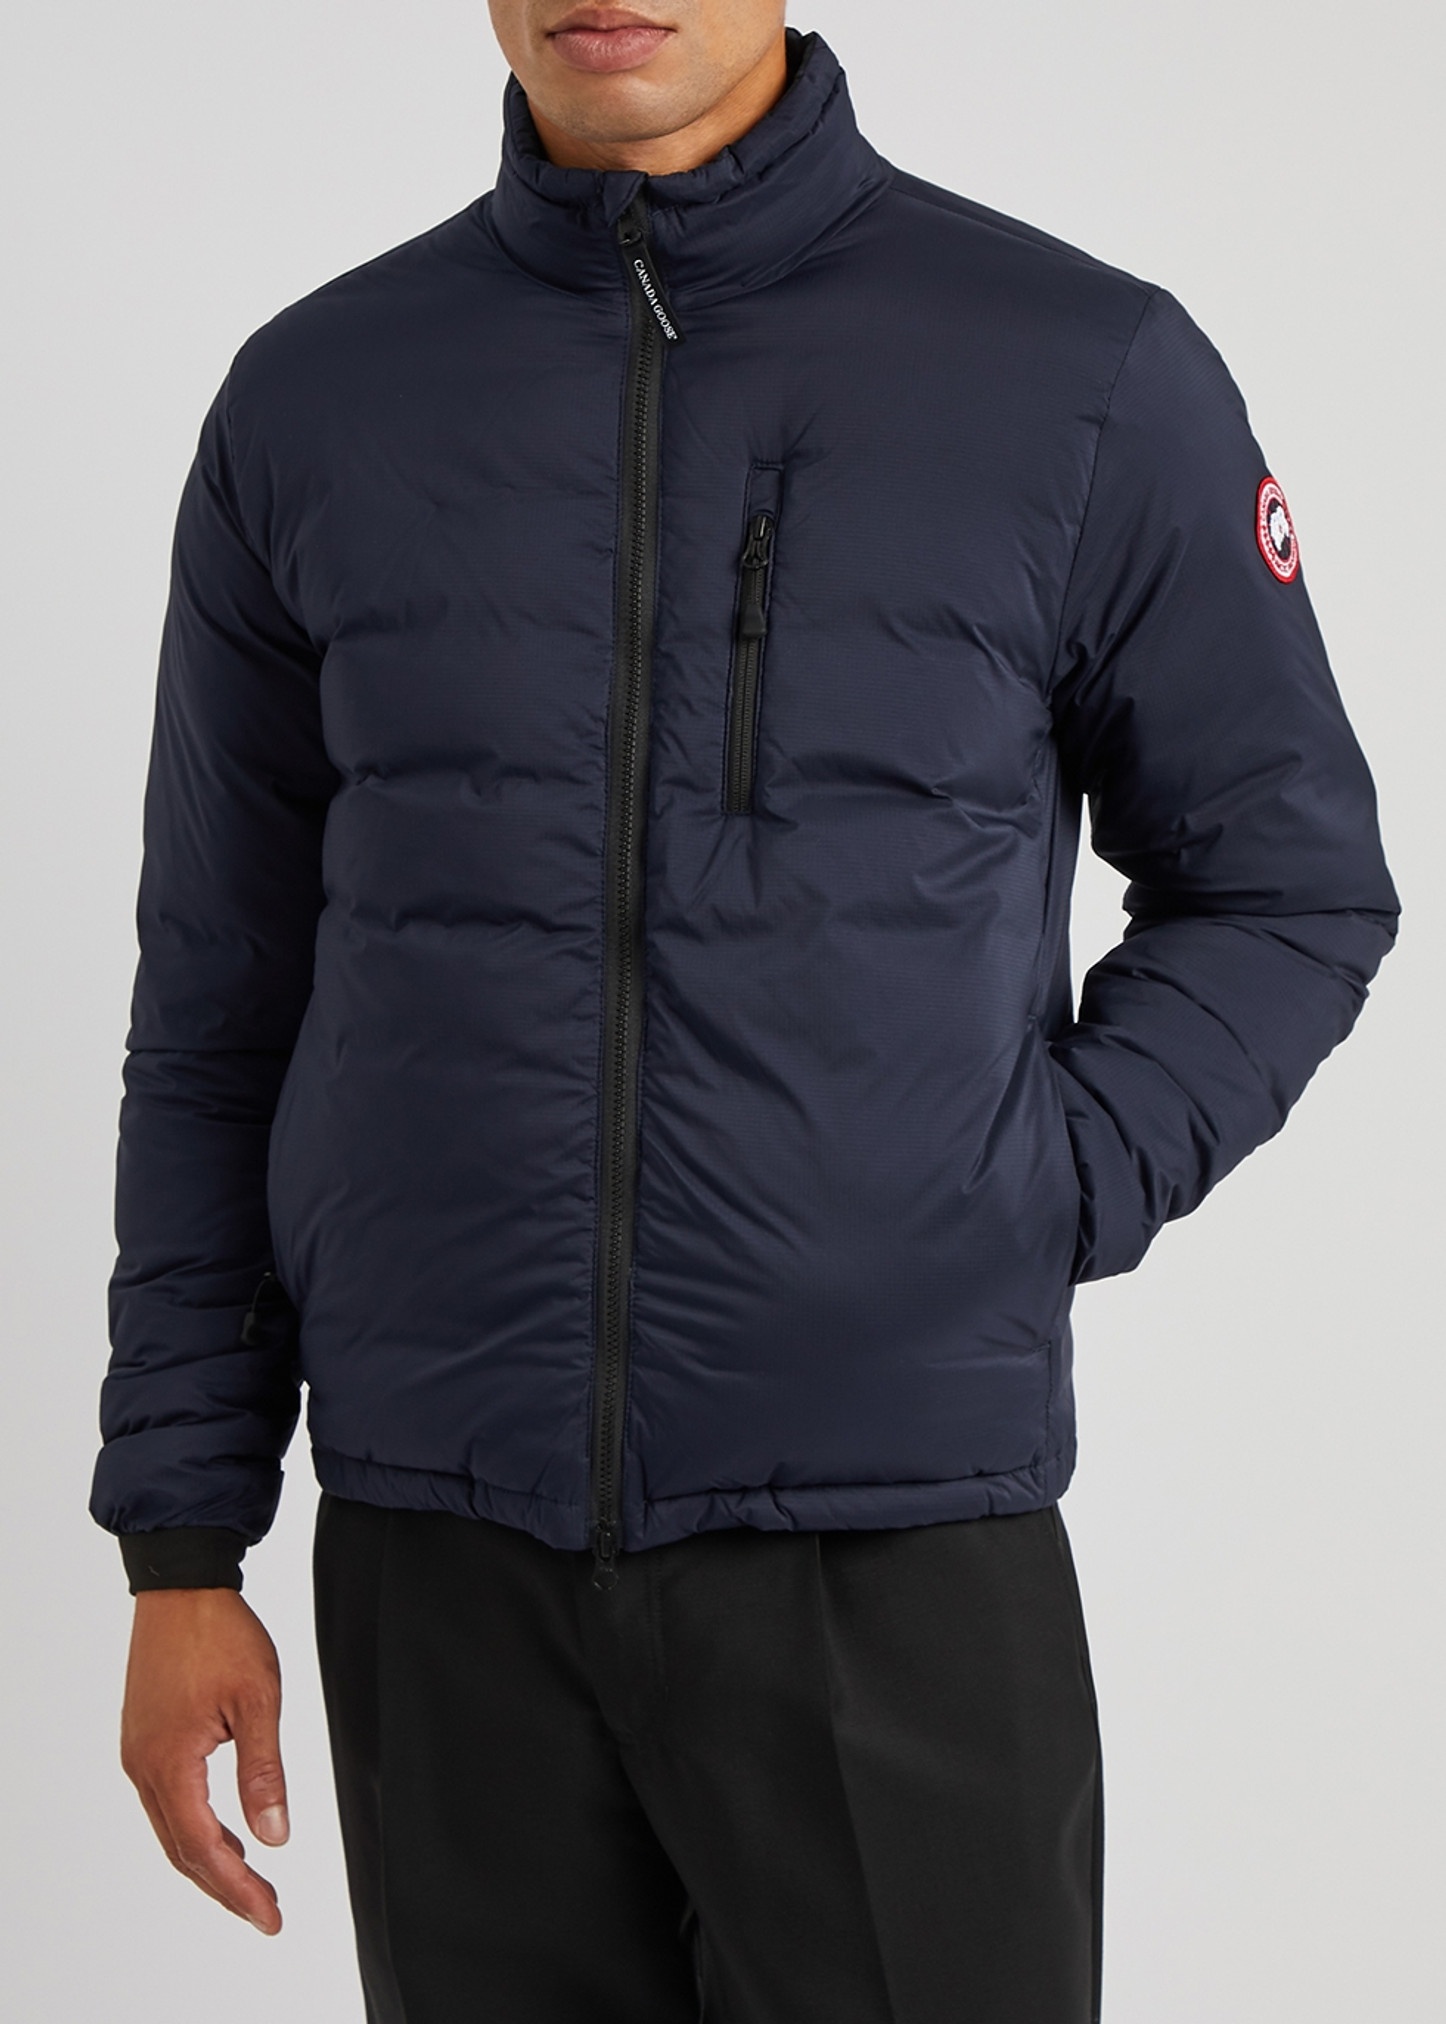 Lodge navy Feather-Light shell jacket - 2